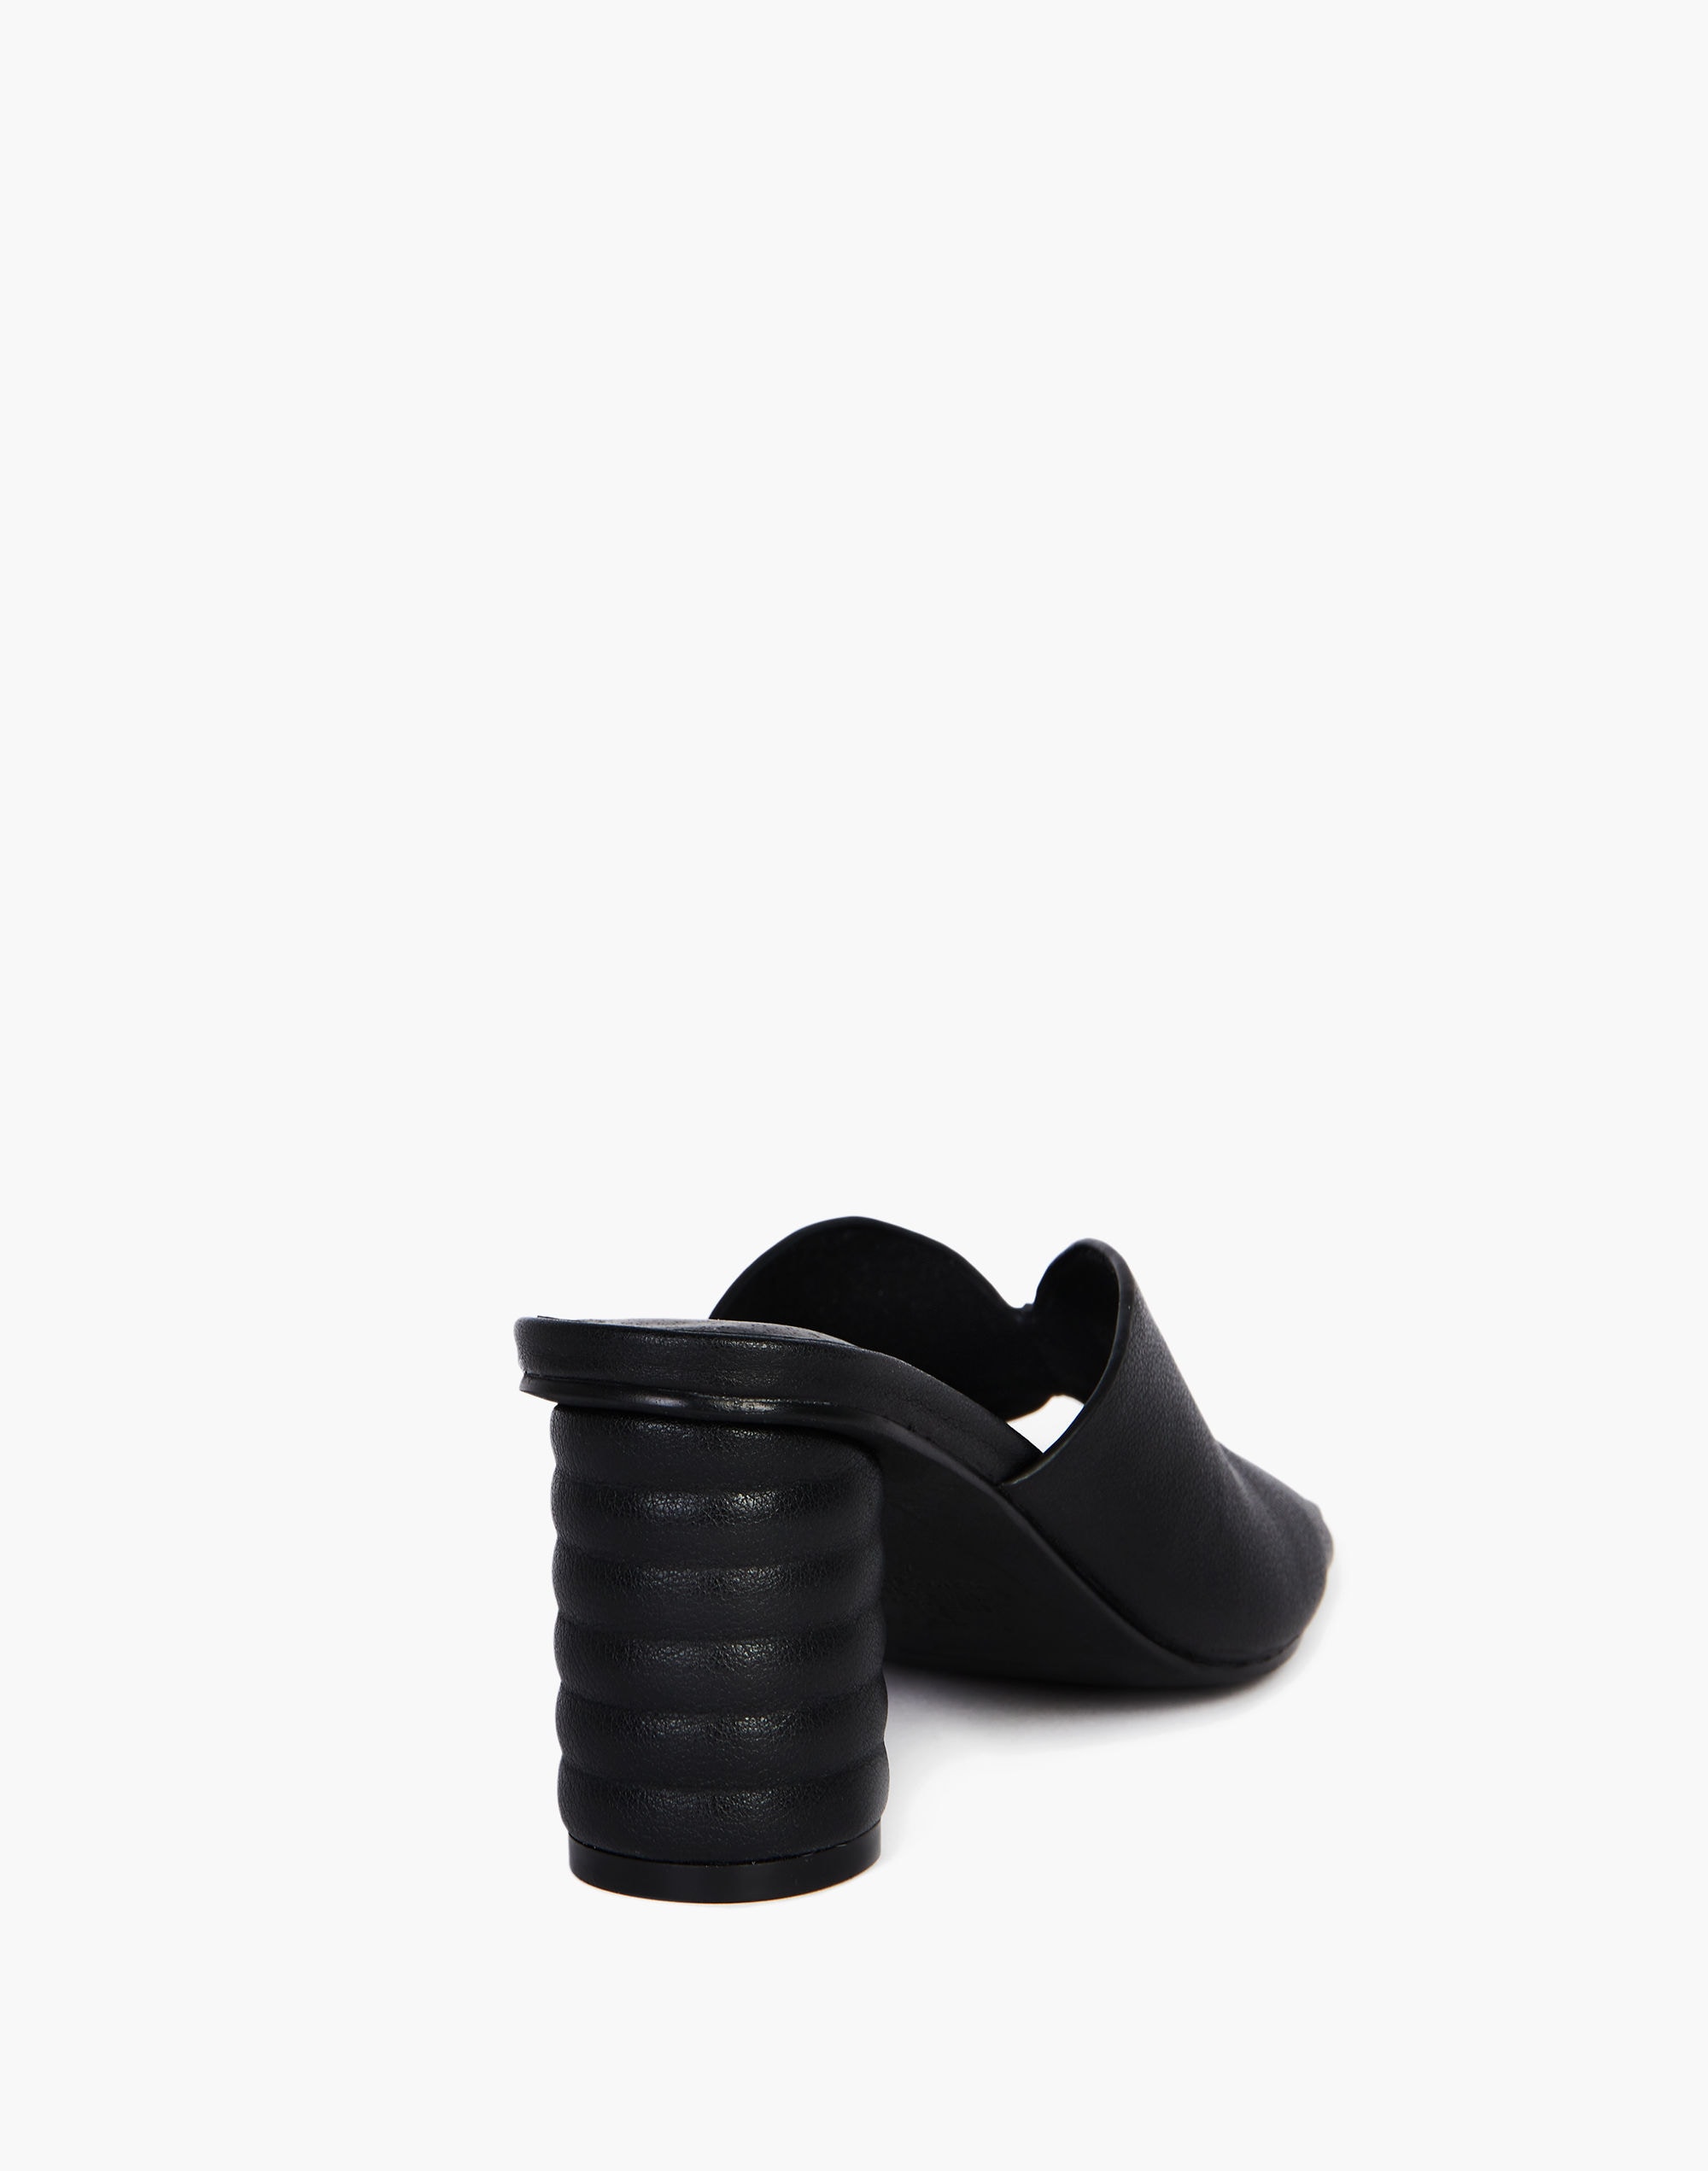 Intentionally Blank Leather Kamika Mules